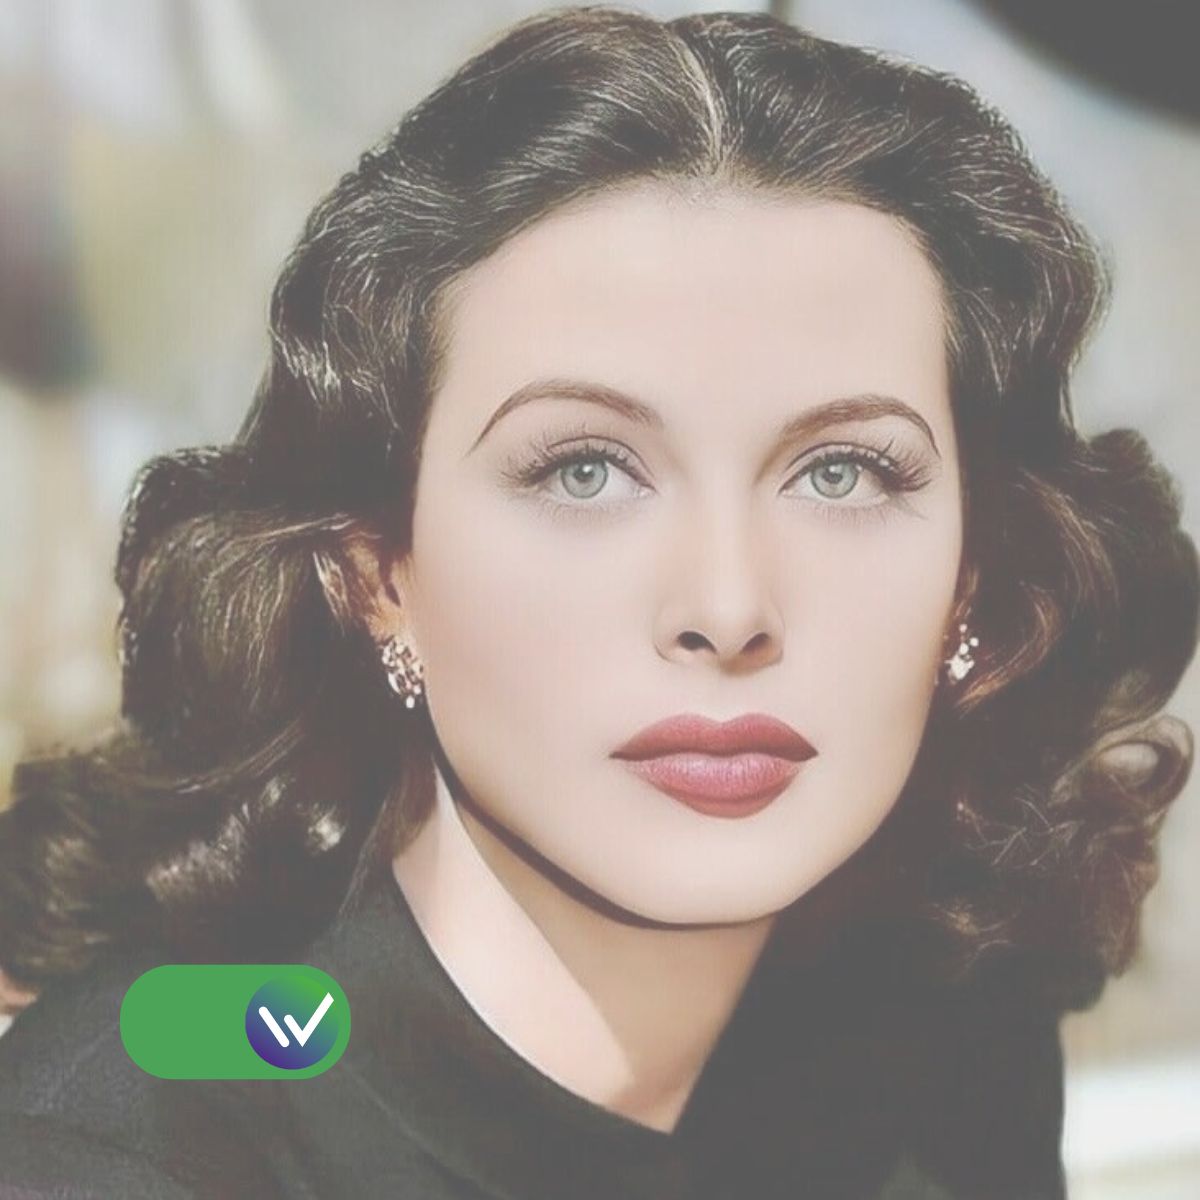 Did you know that a woman invented Wi-Fi technology? Hedy Lamarr was a Hollywood star. She co-created a 'spread-spectrum radio'. It's now seen as a precursor to today's Wi-Fi. 

#EmpoWomen is looking for female innovators! empowomen.eu

#Investment #Innovation